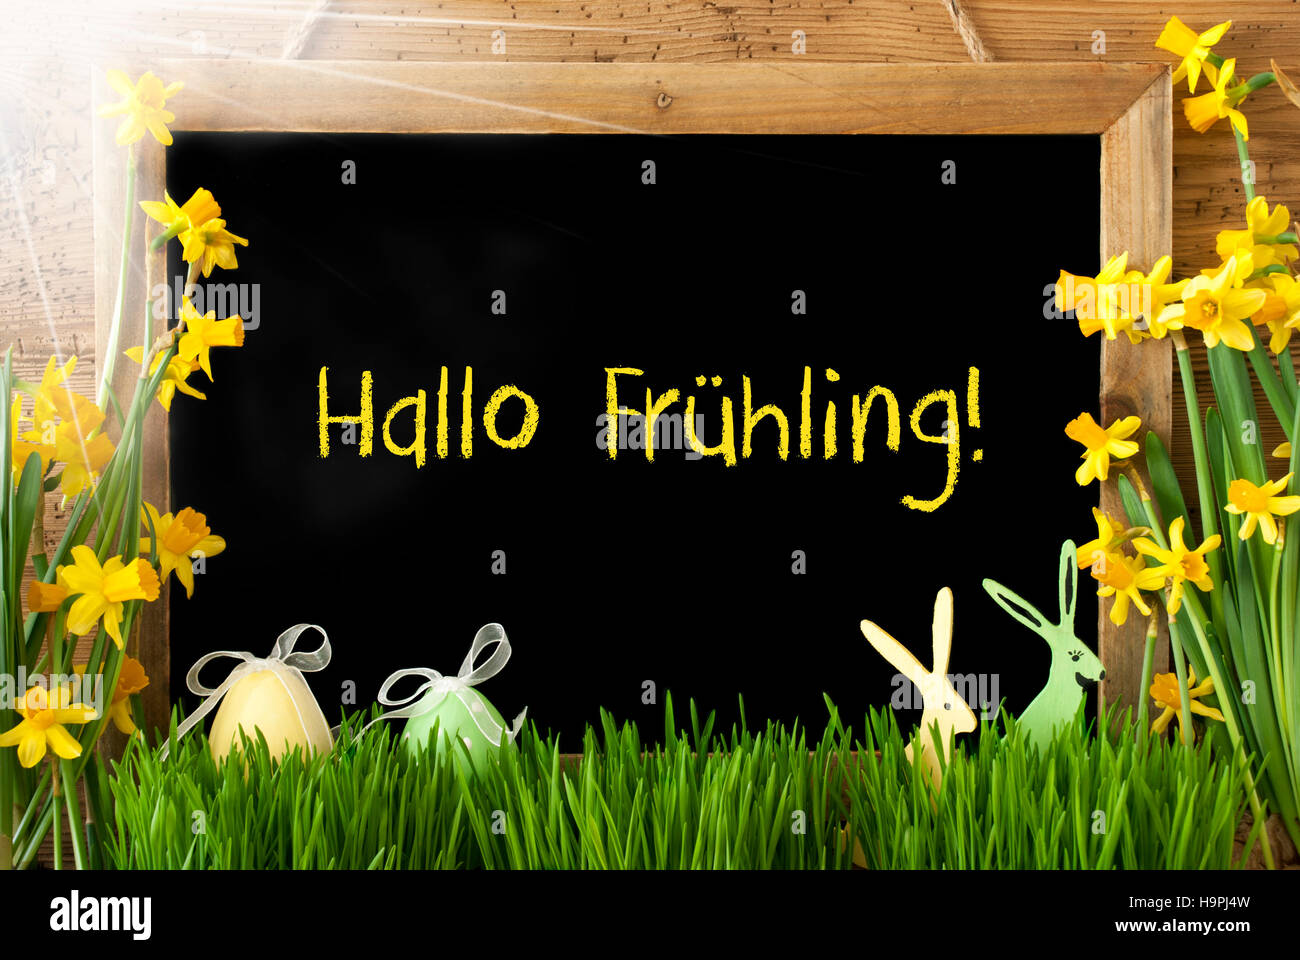 Sunny Narcissus, Easter Egg, Bunny, Hallo Fruehling Means Hello Spring Stock Photo